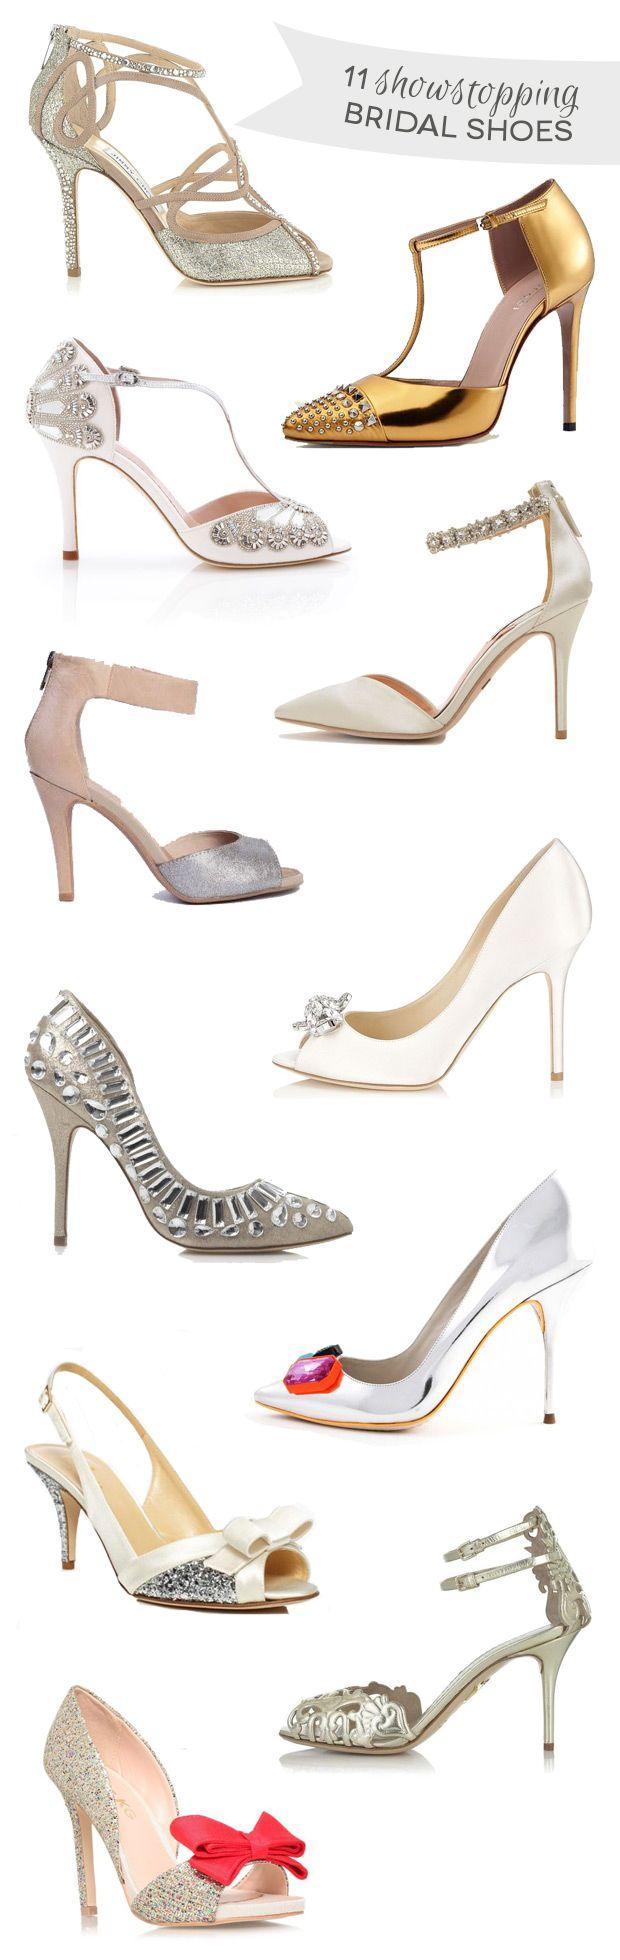 Wedding - 11 Showstopping Bridal Shoes